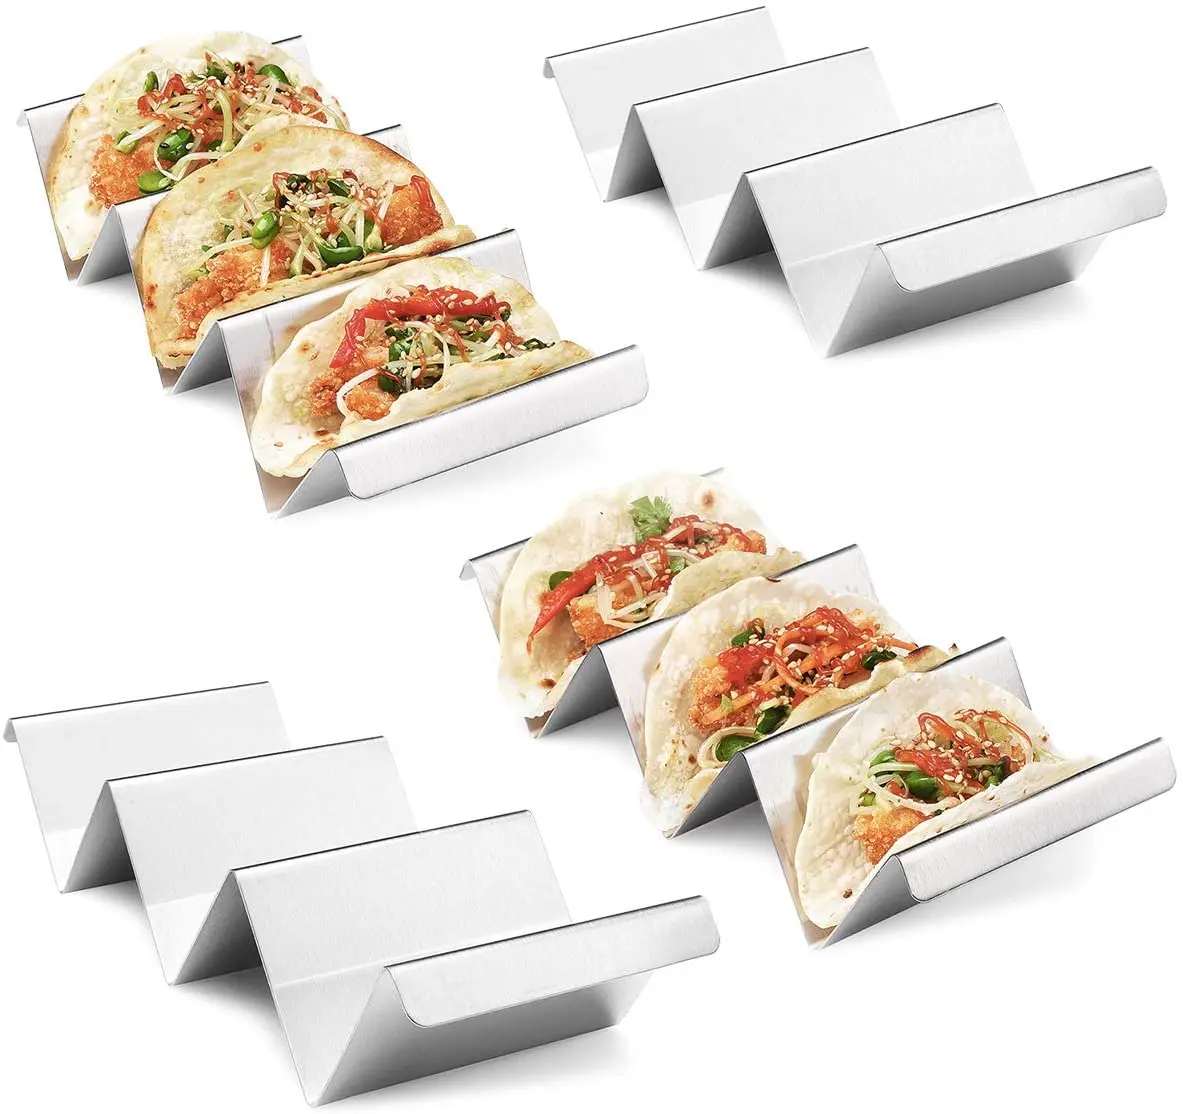 

Wholesale Stainless Steel 4 Pack Taco Holder Stand Taco Truck Tray Style Rack Holds Up to 3 Tacos Each, Silver